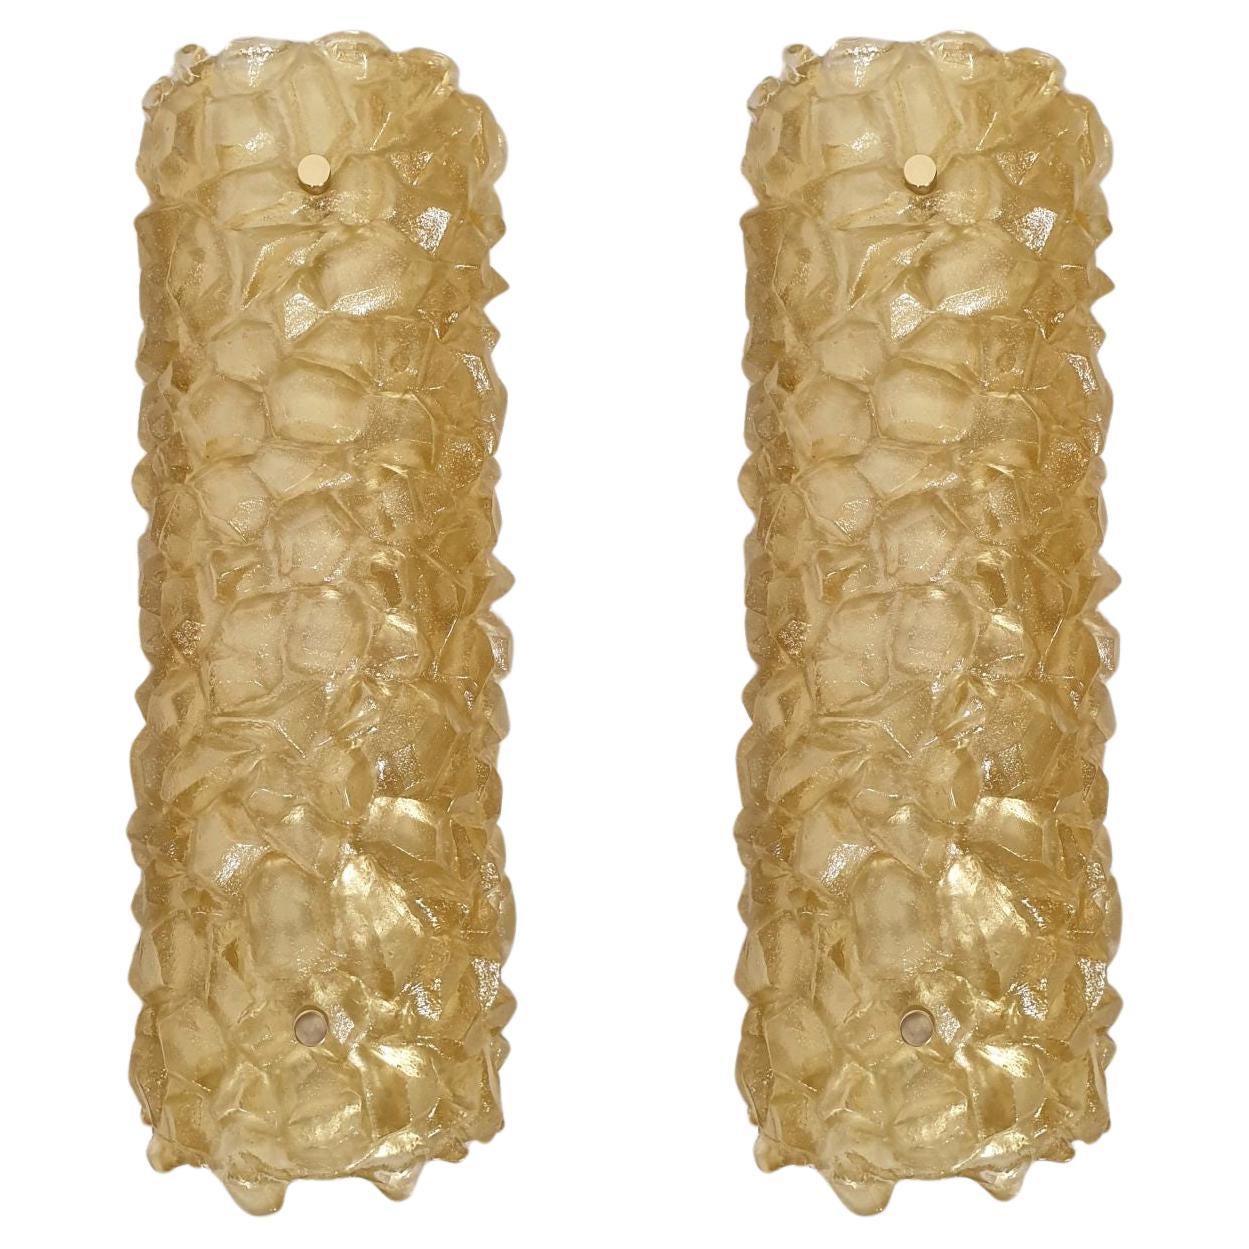 Gold Murano glass sconces, Italy - a pair